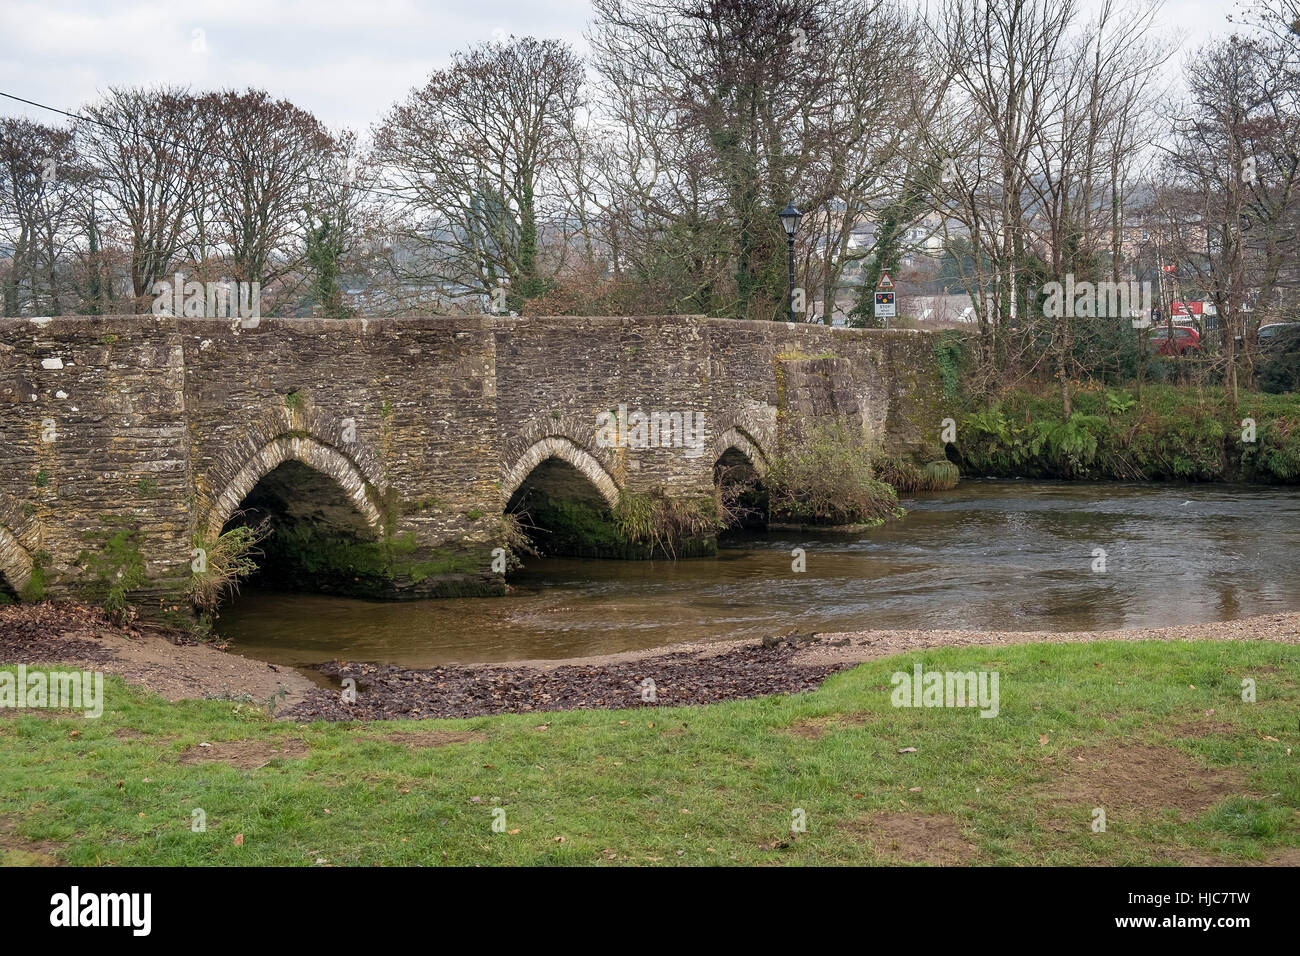 A medieval bridge crosses the River Fowey in the historic town of Lostwithiel in Cornwall, England. Stock Photo